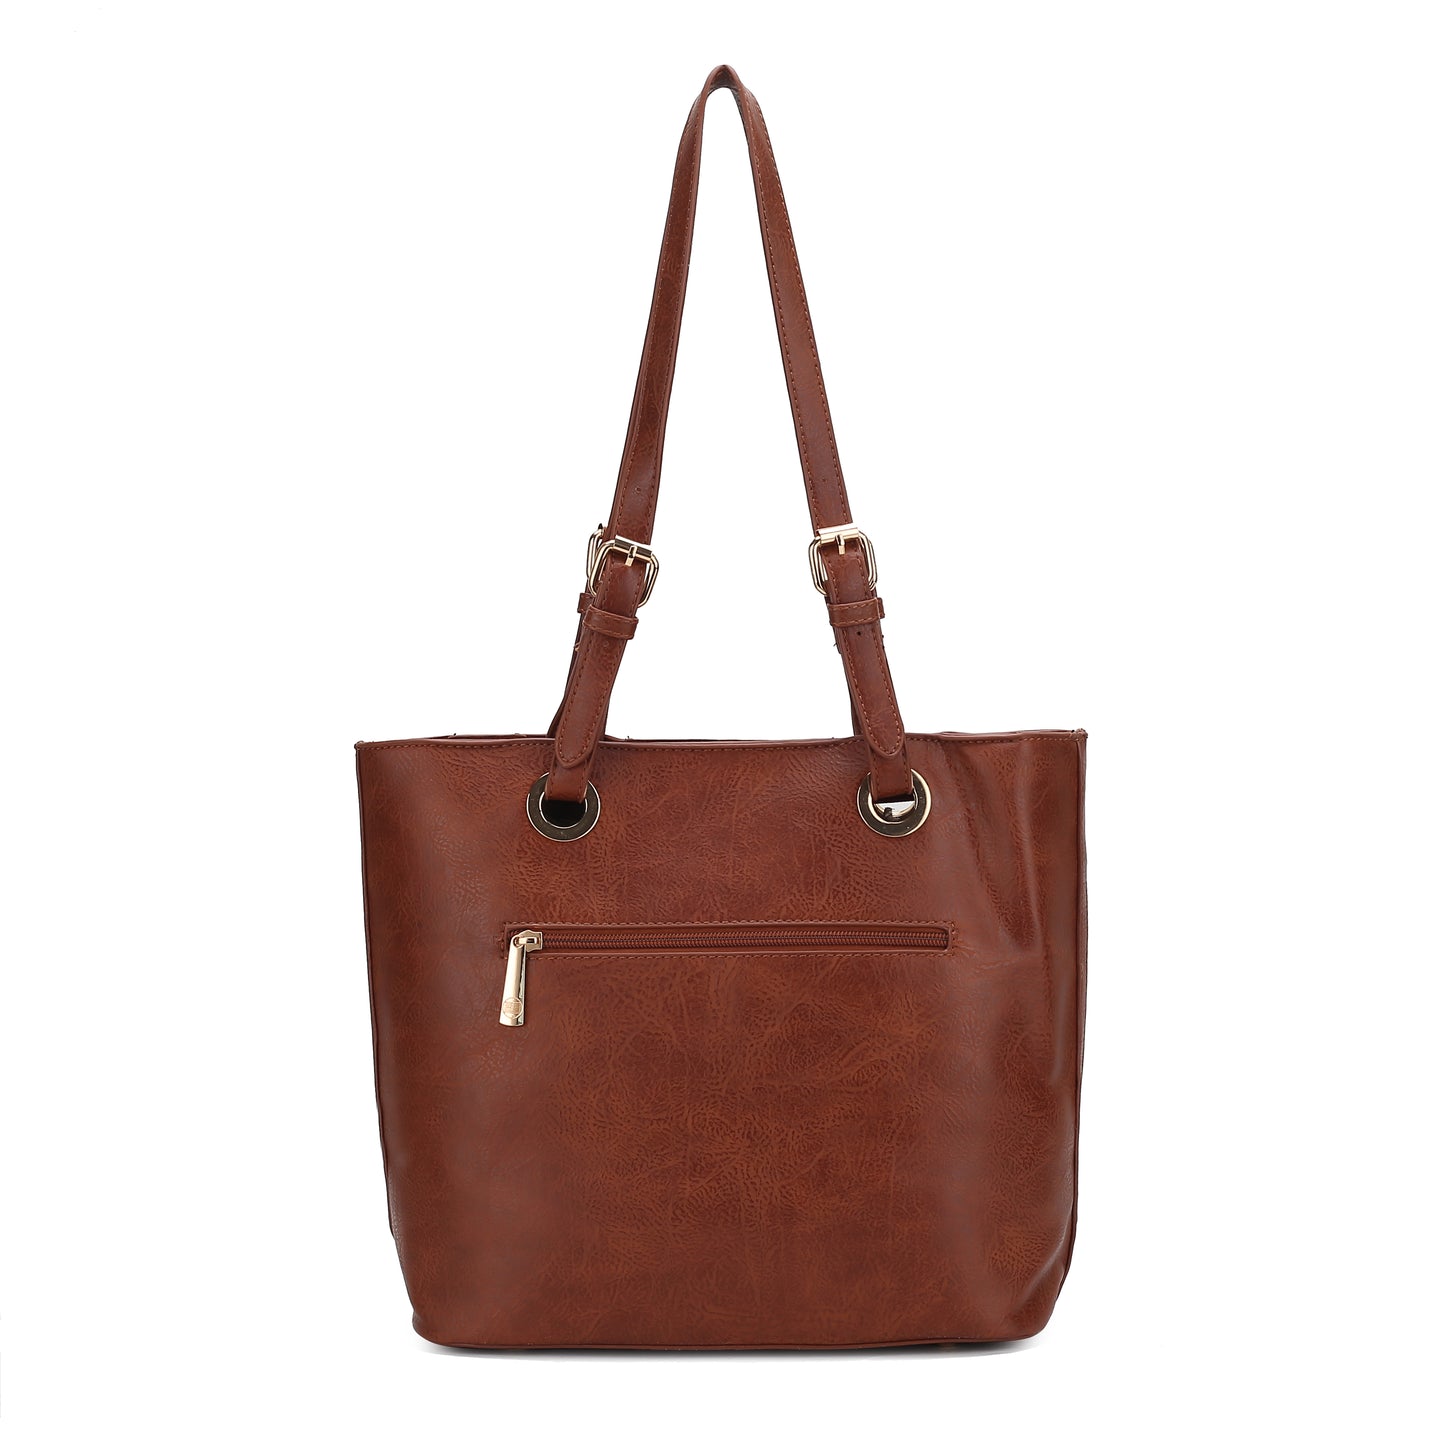 A Brown Vera Vegan Leather Patriotic Flag Pattern Women Tote Bag with two handles, made by Pink Orpheus.